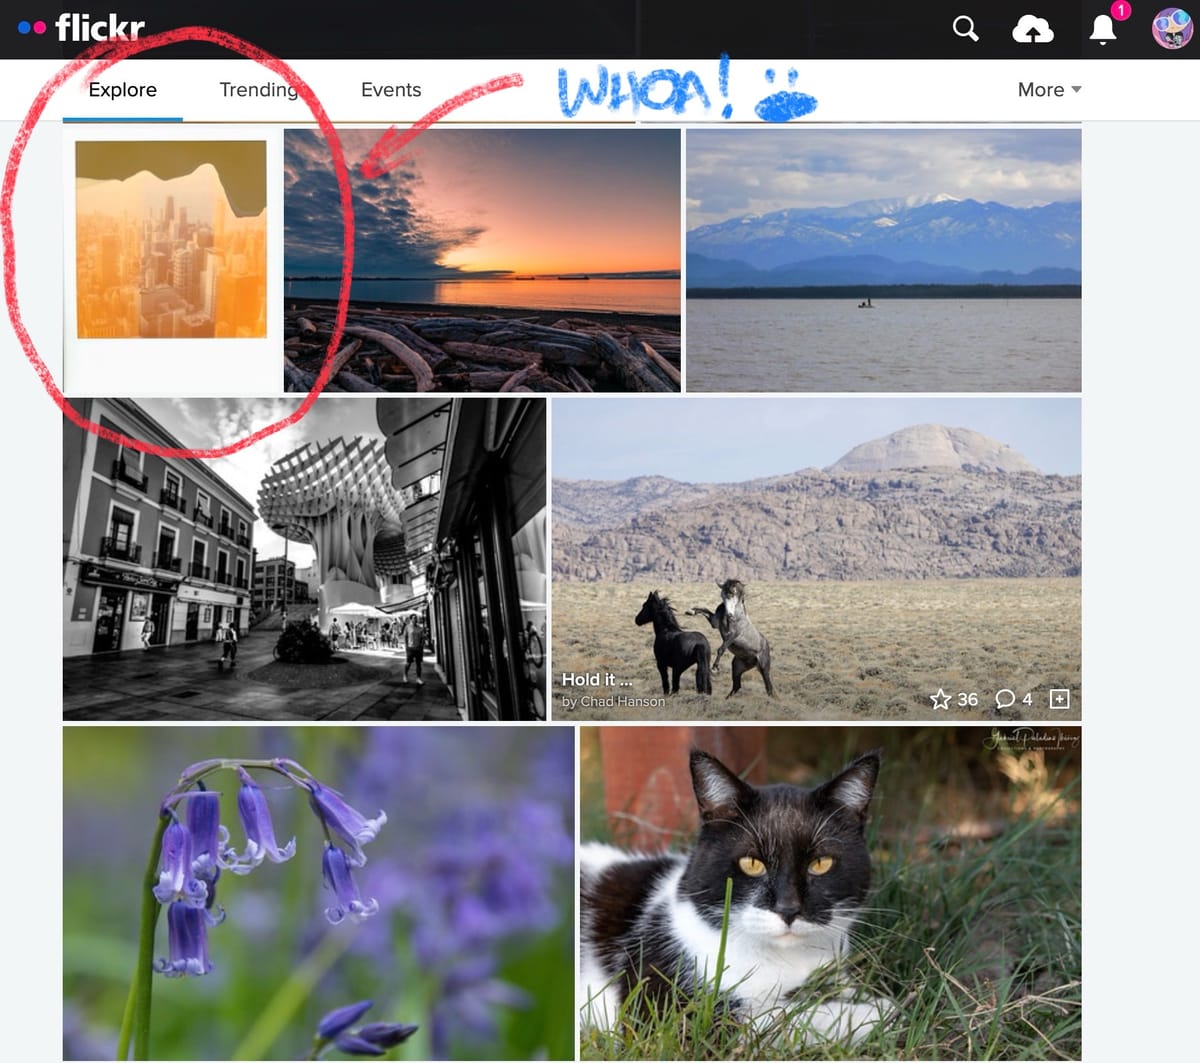 Screenshot of my Polaroid Week day 2 image in the Explore feed, my image circled in red with "whoa!" annotation